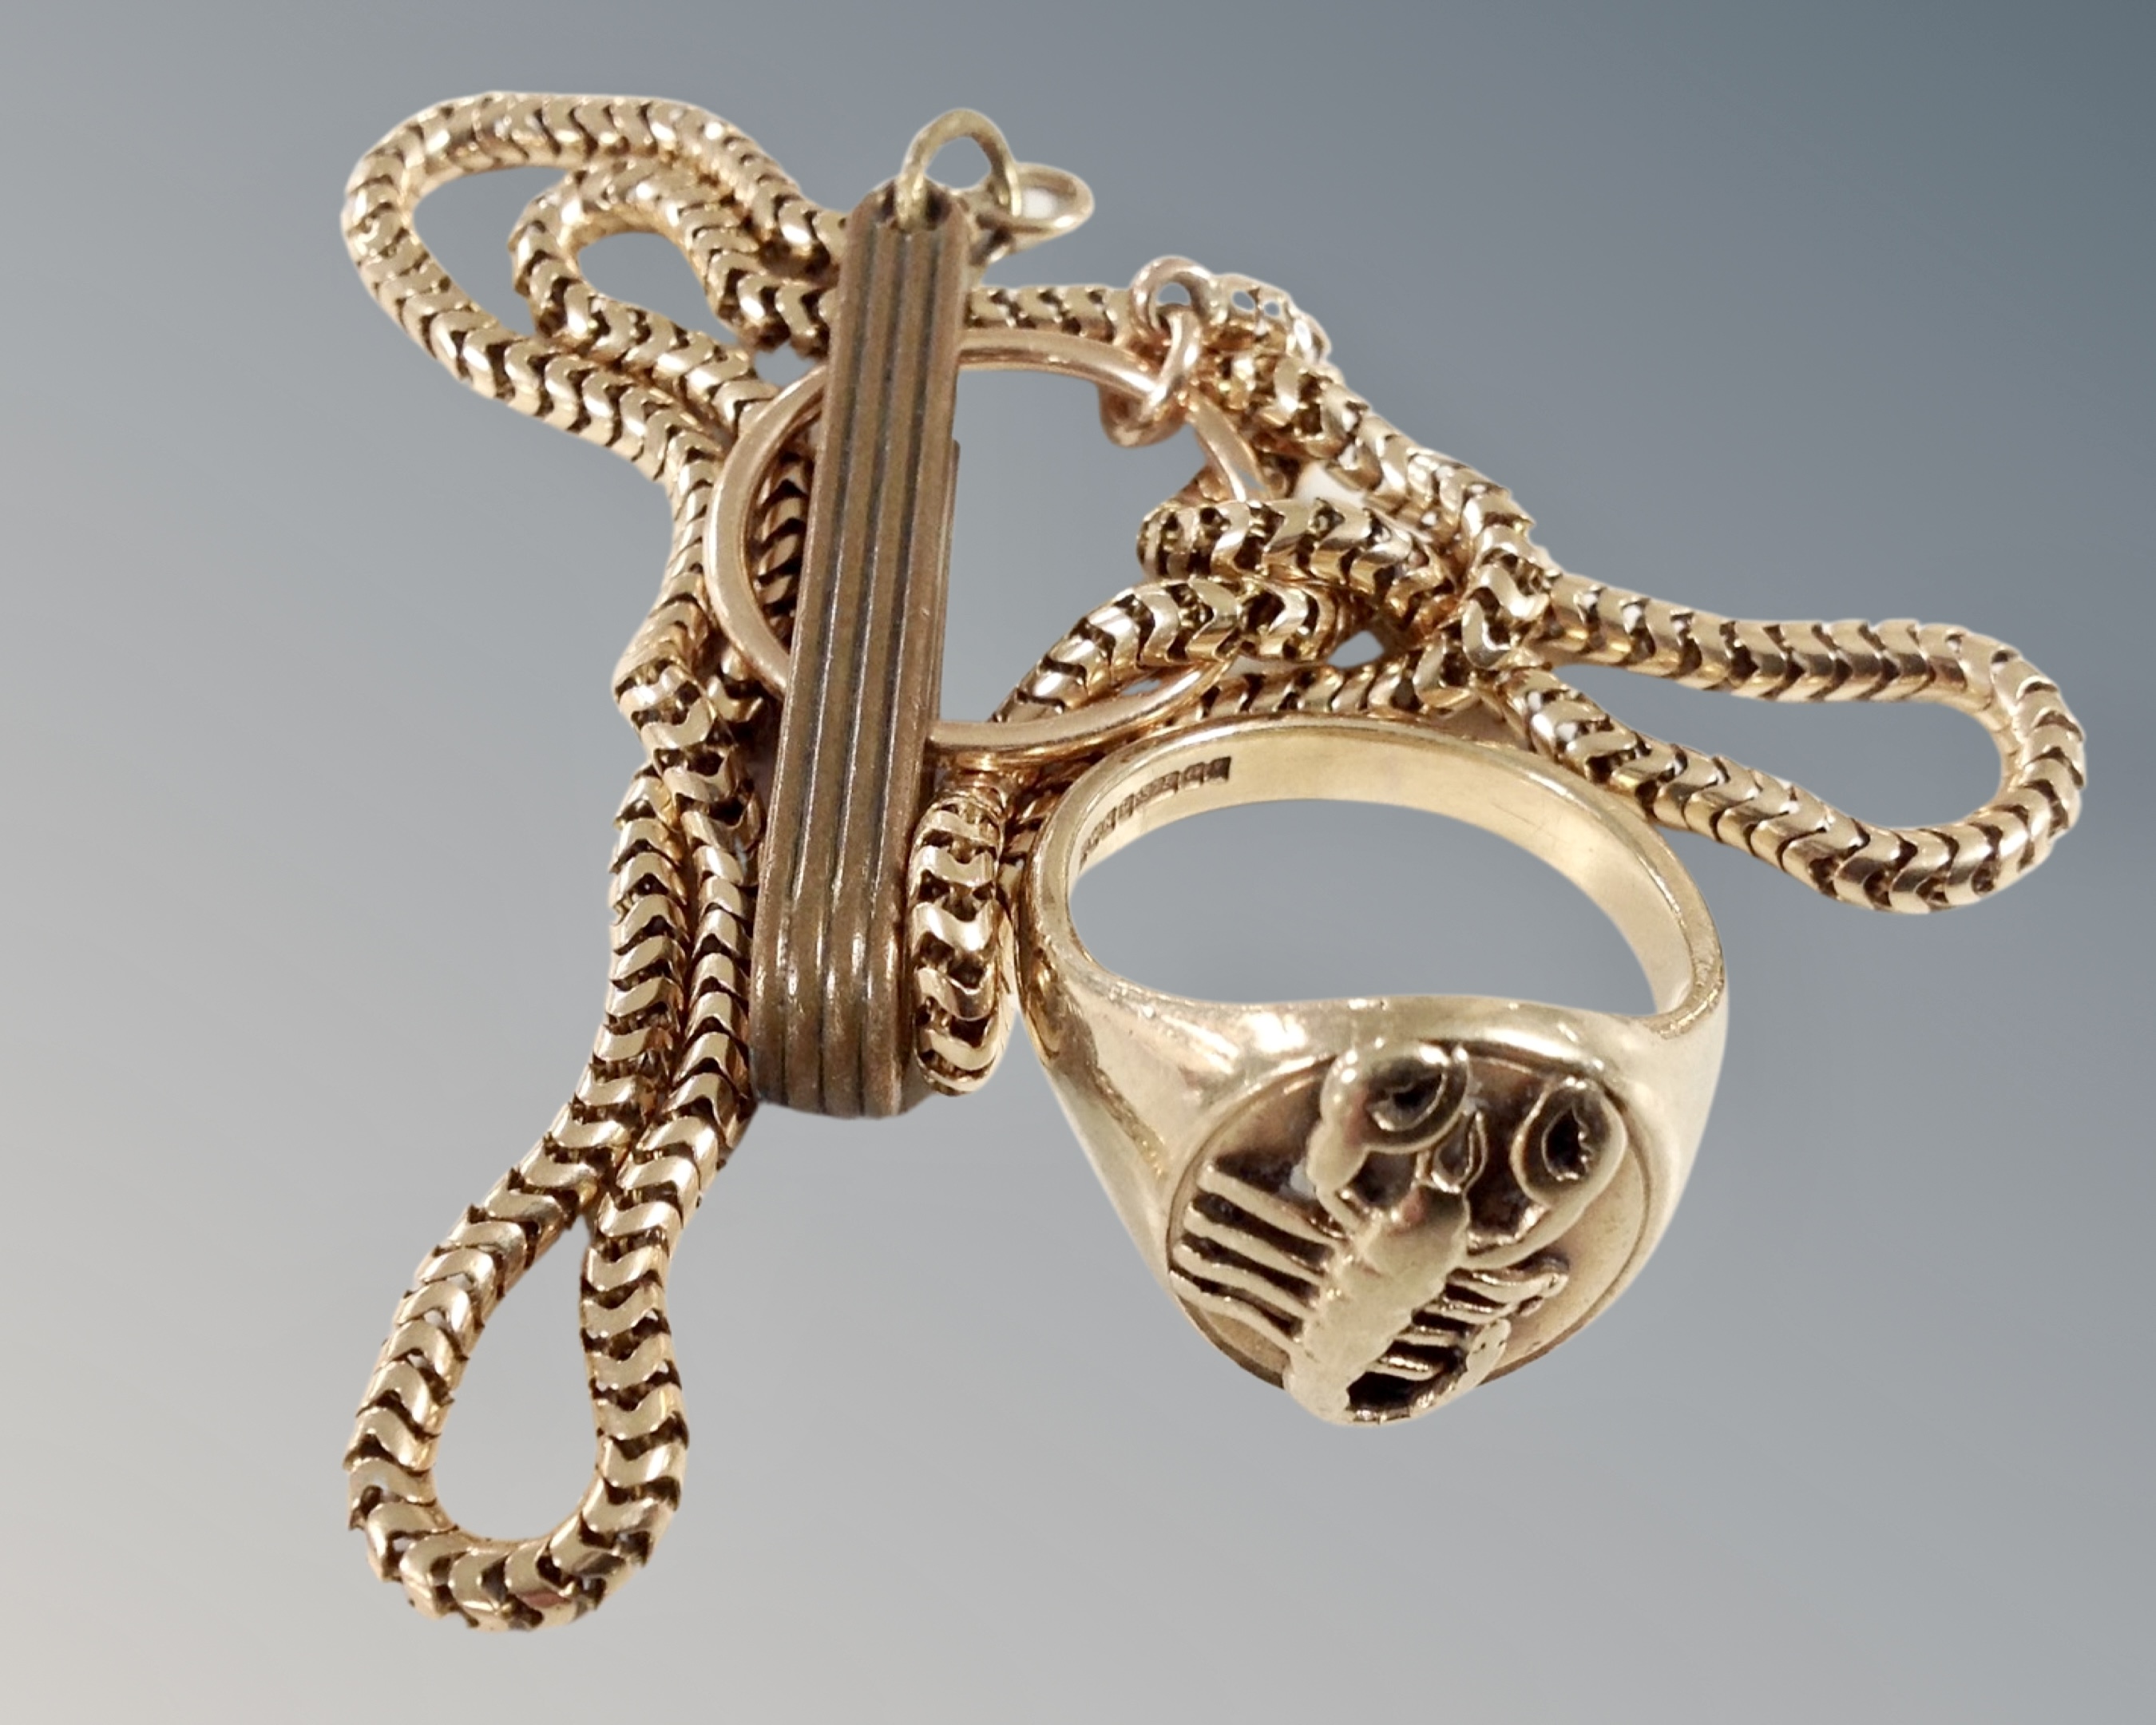 A gent's heavy gauge 9ct gold signet ring embossed with a scorpion together with a gilt chain.